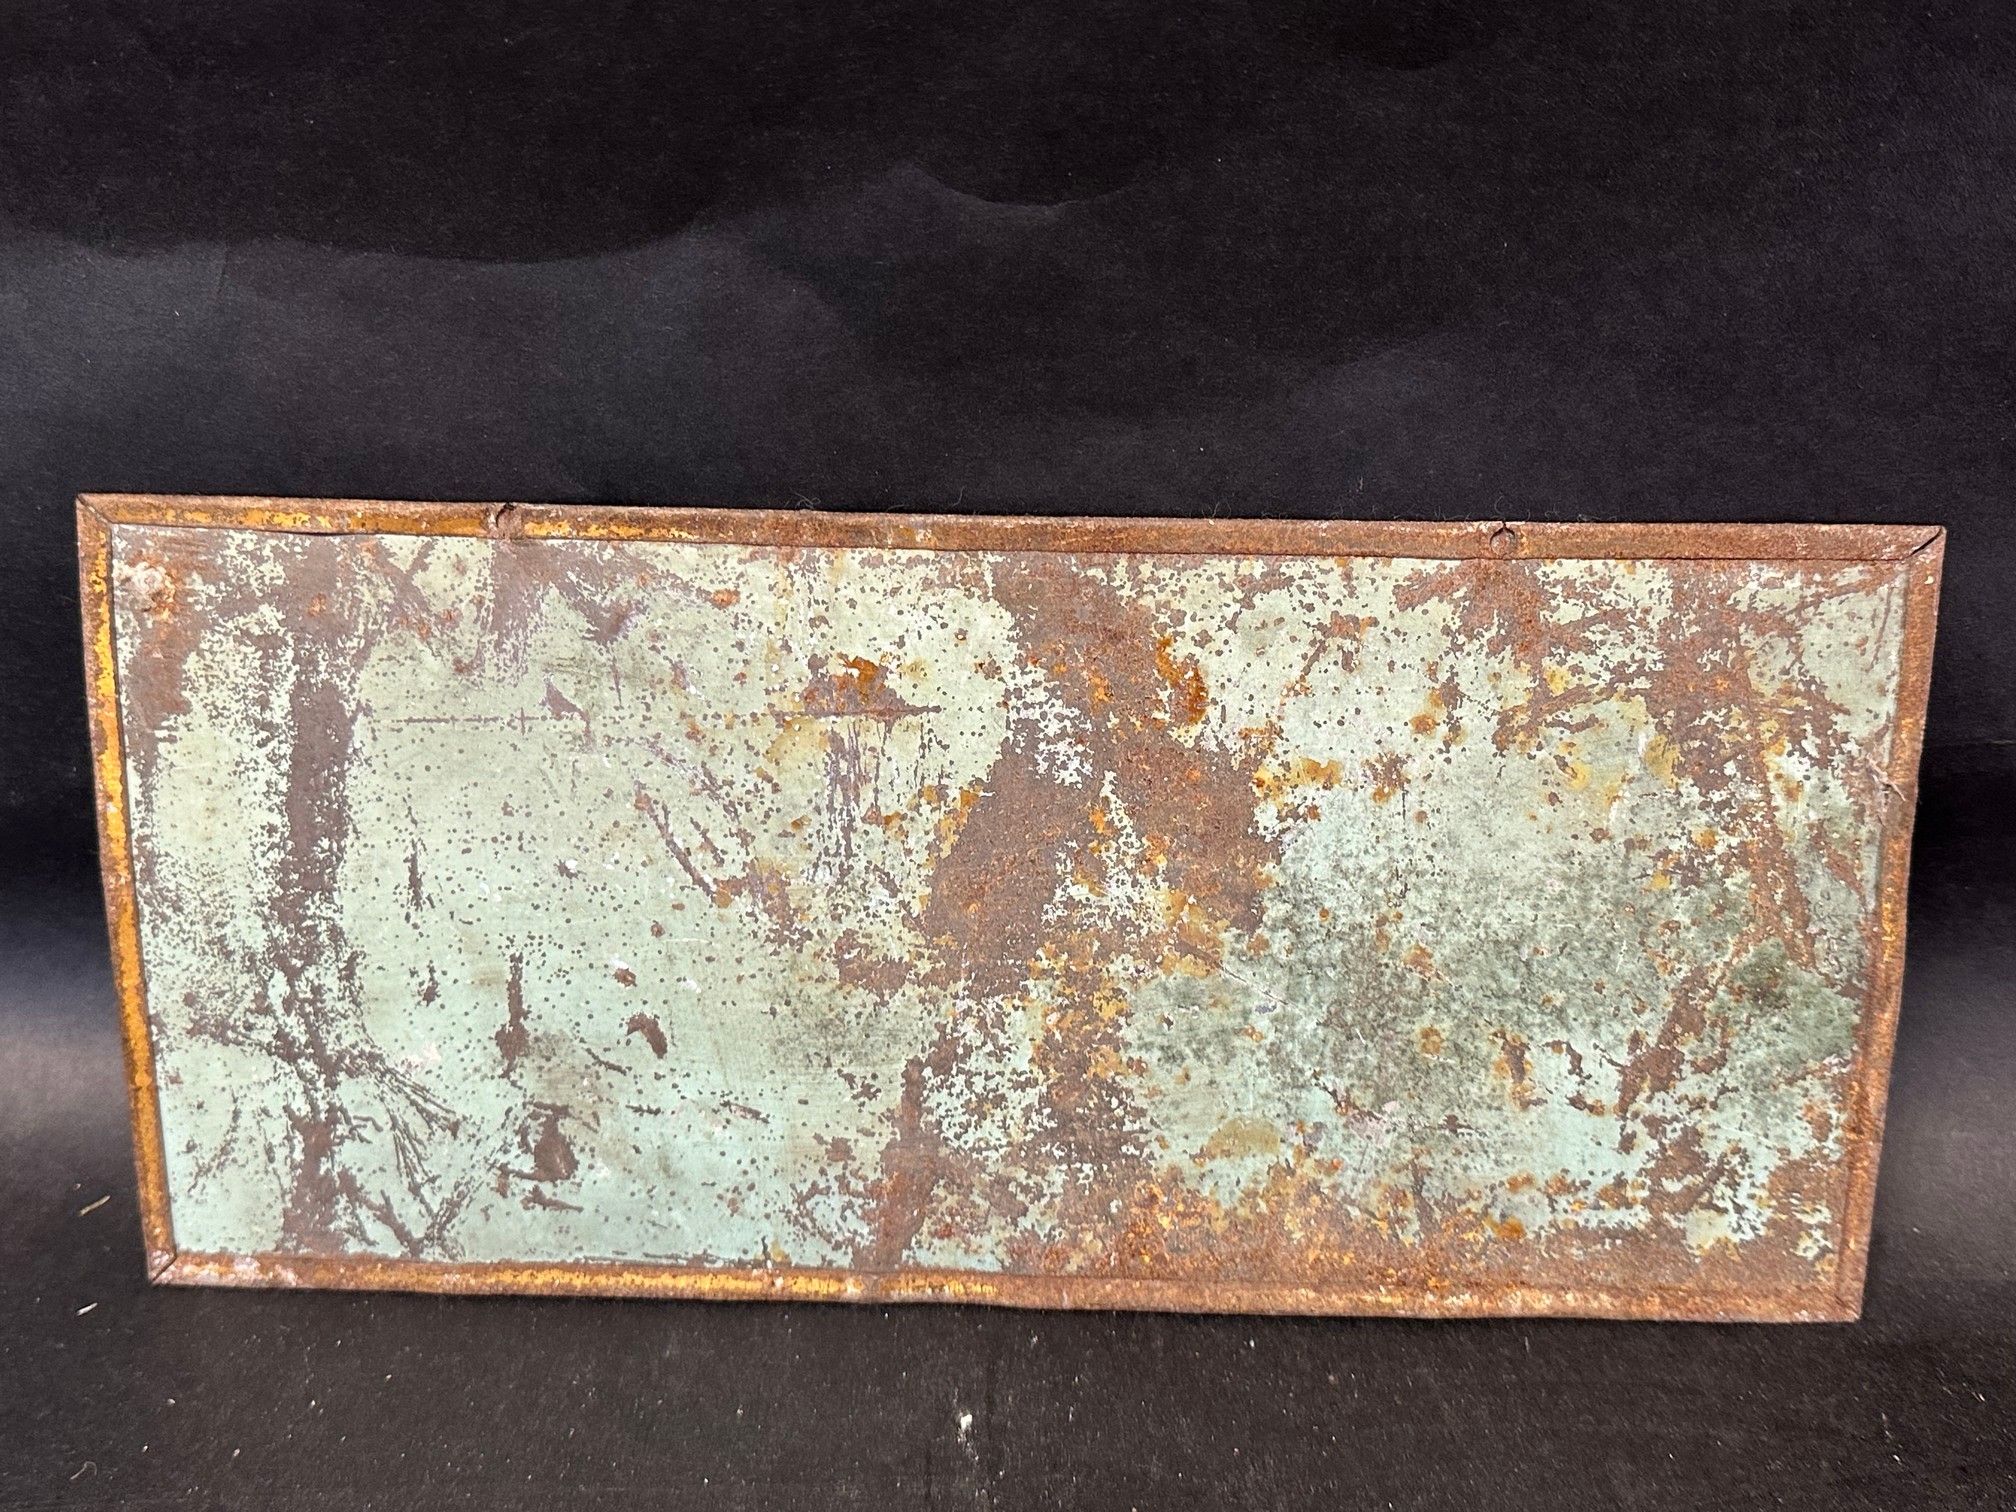 A Taddy's Imperial Tobacco tin advertising sign, 13 x 6". - Image 2 of 5